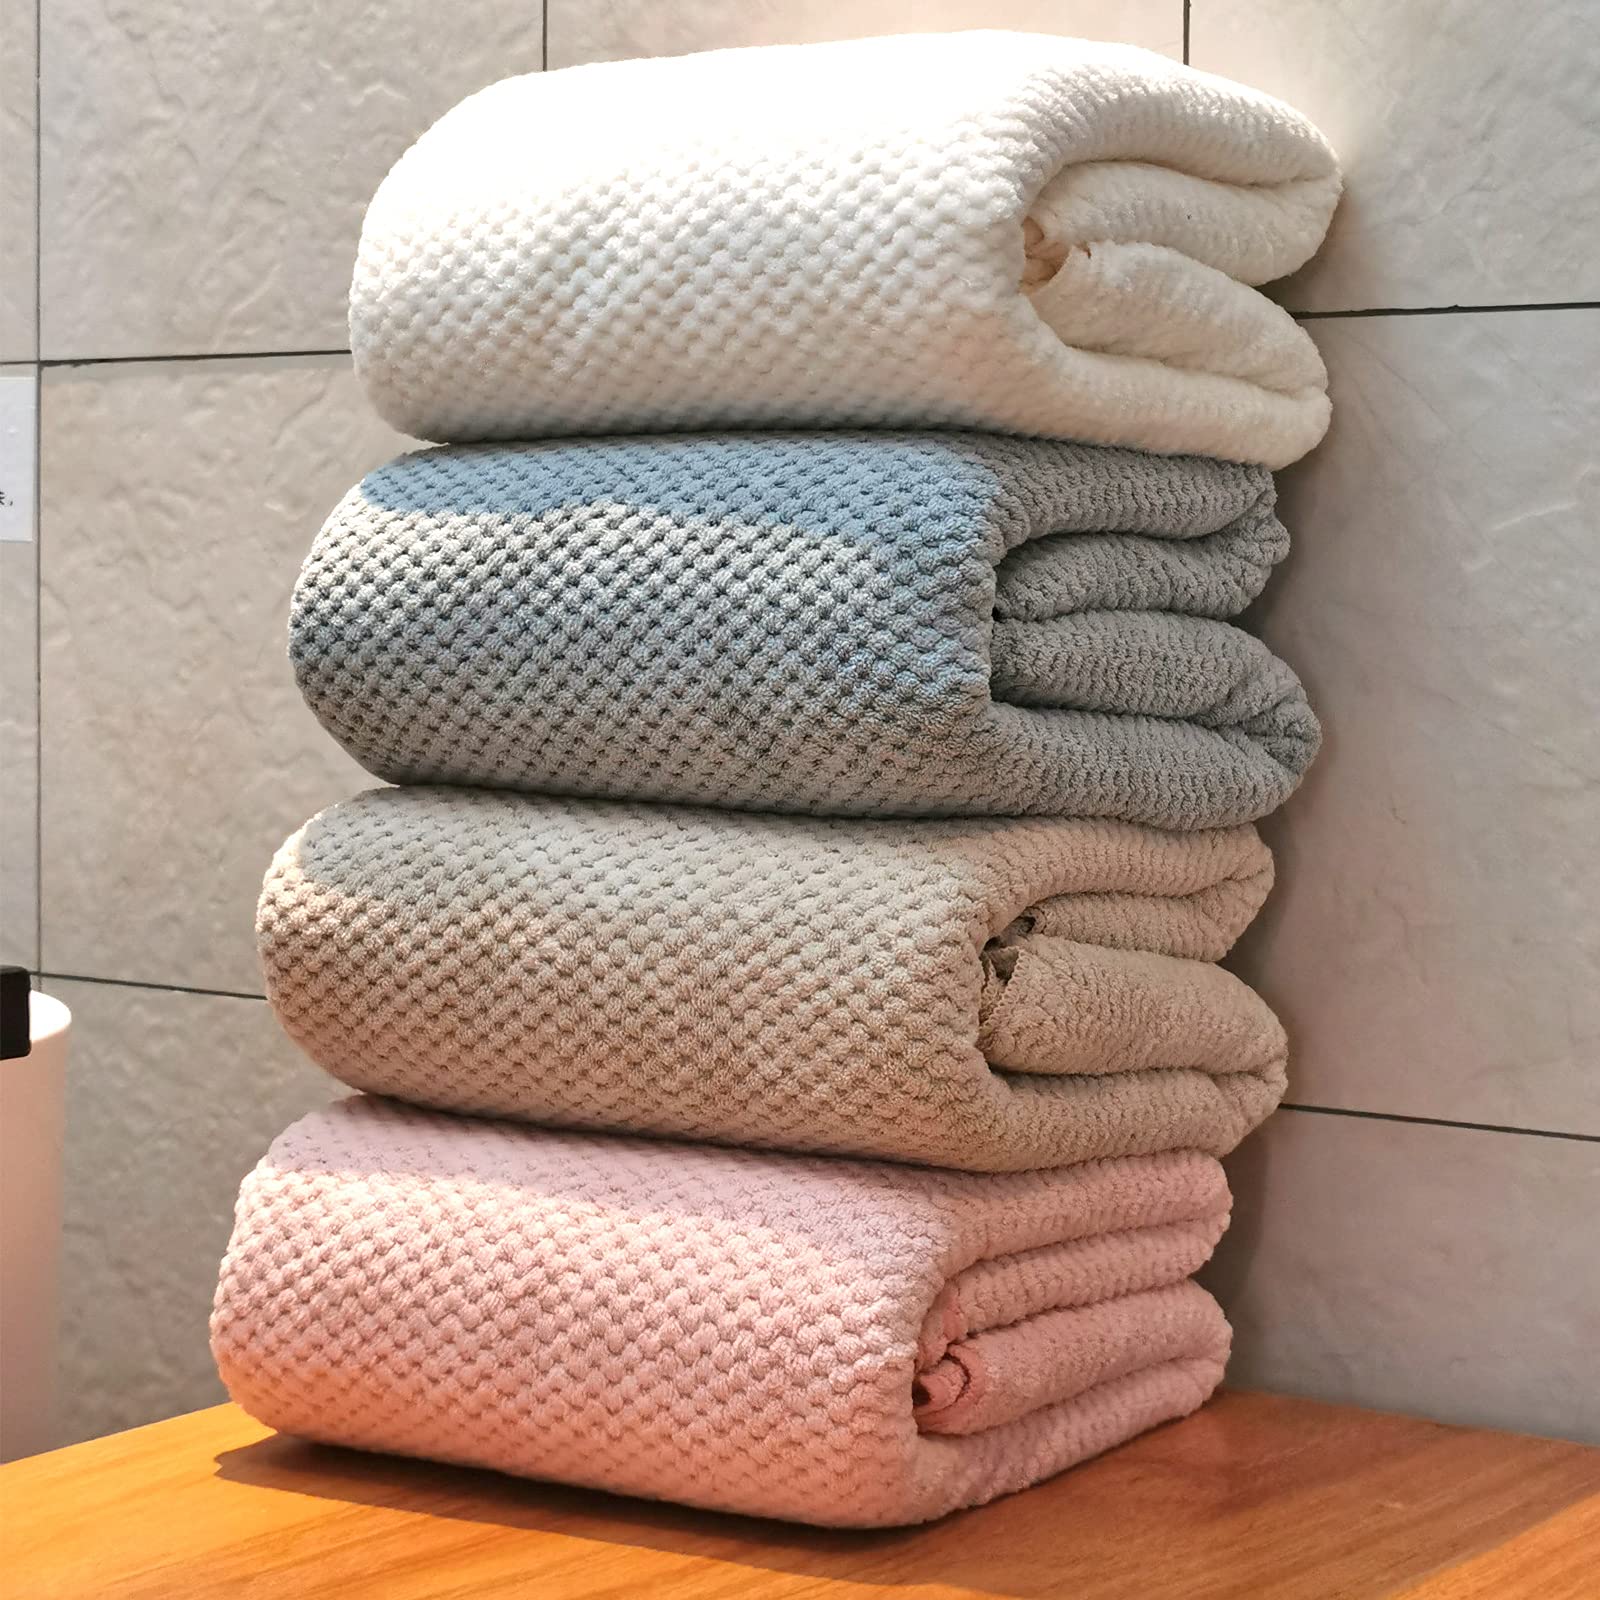 YTYC Towels,39x78 Inch Oversized Bath Sheets Towels for Adults Luxury Bath Towels Extra Large Sets for Bathroom Super Soft Highly Absorbent Microfiber Shower Towels 80% Polyester (Grey,2 Piece)